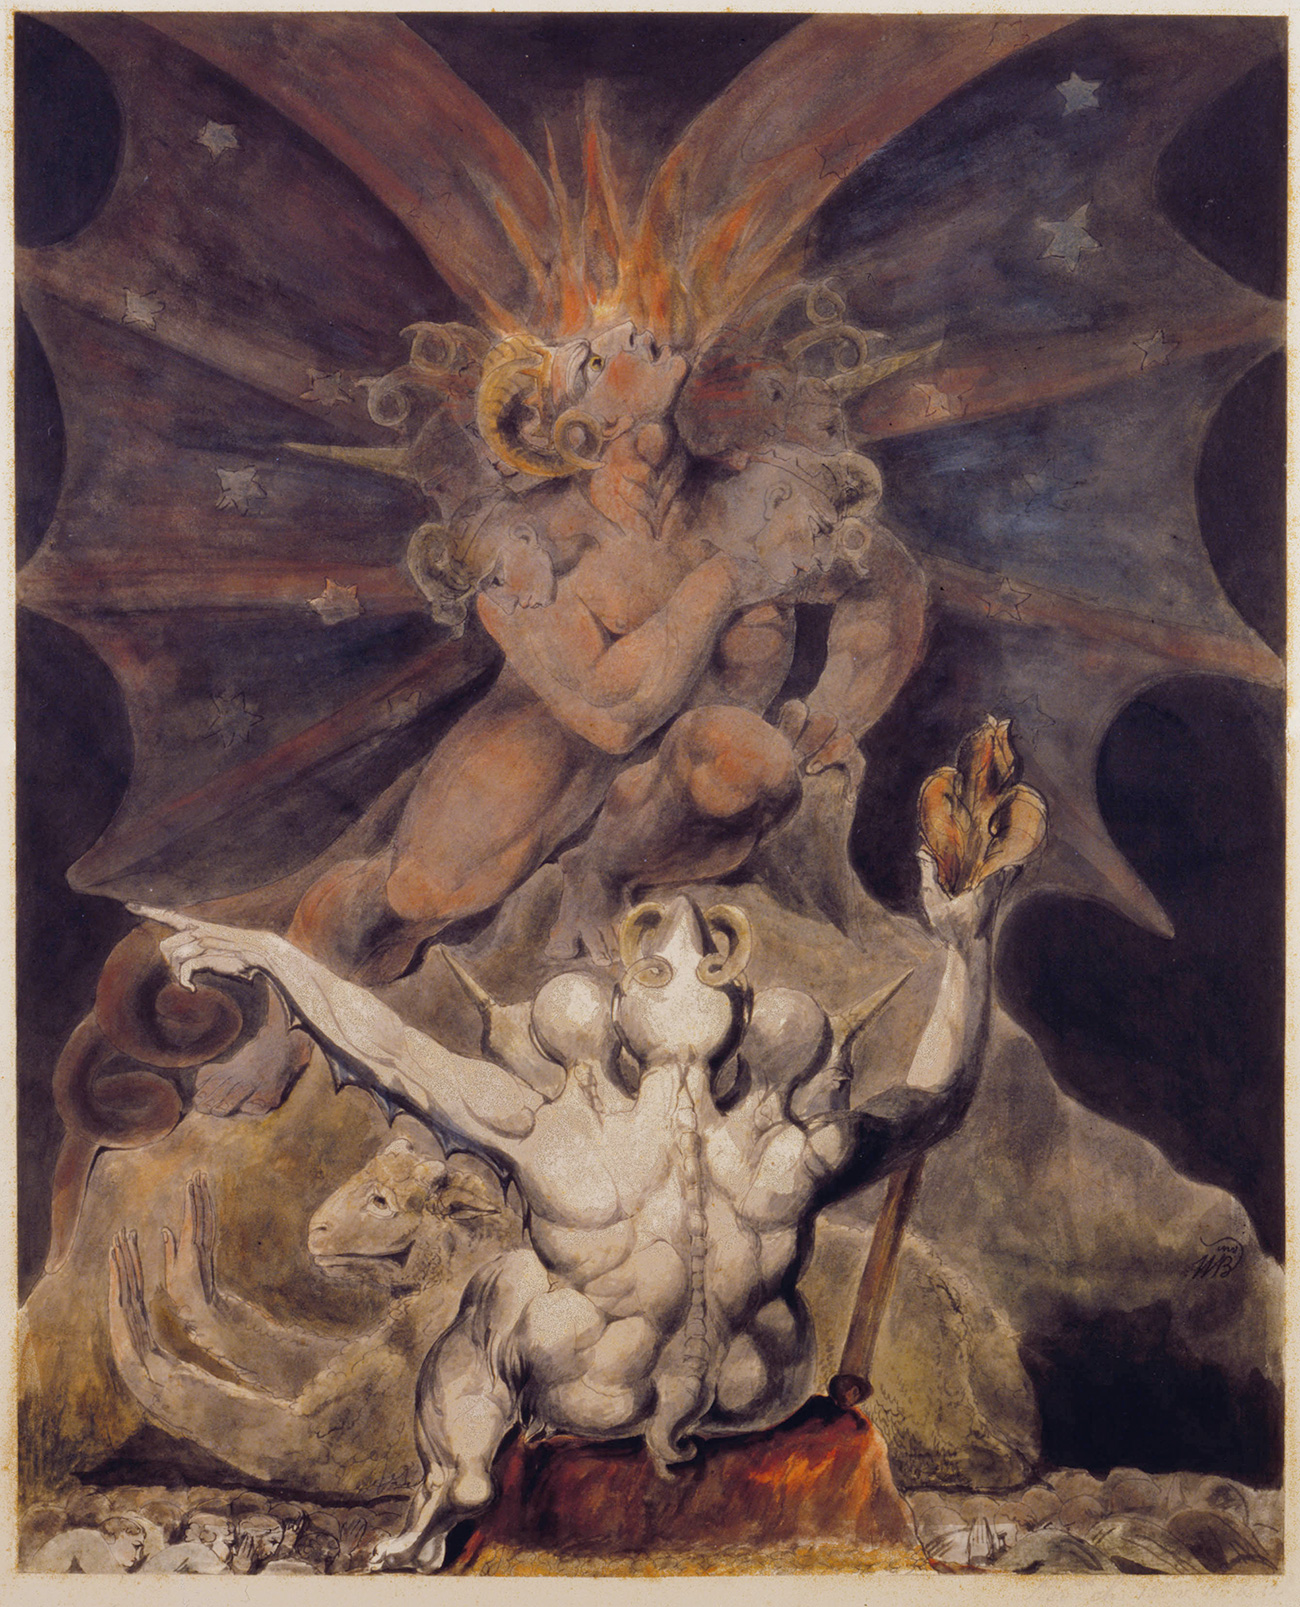  "The Number of the Beast is 666" / William Blake Archive